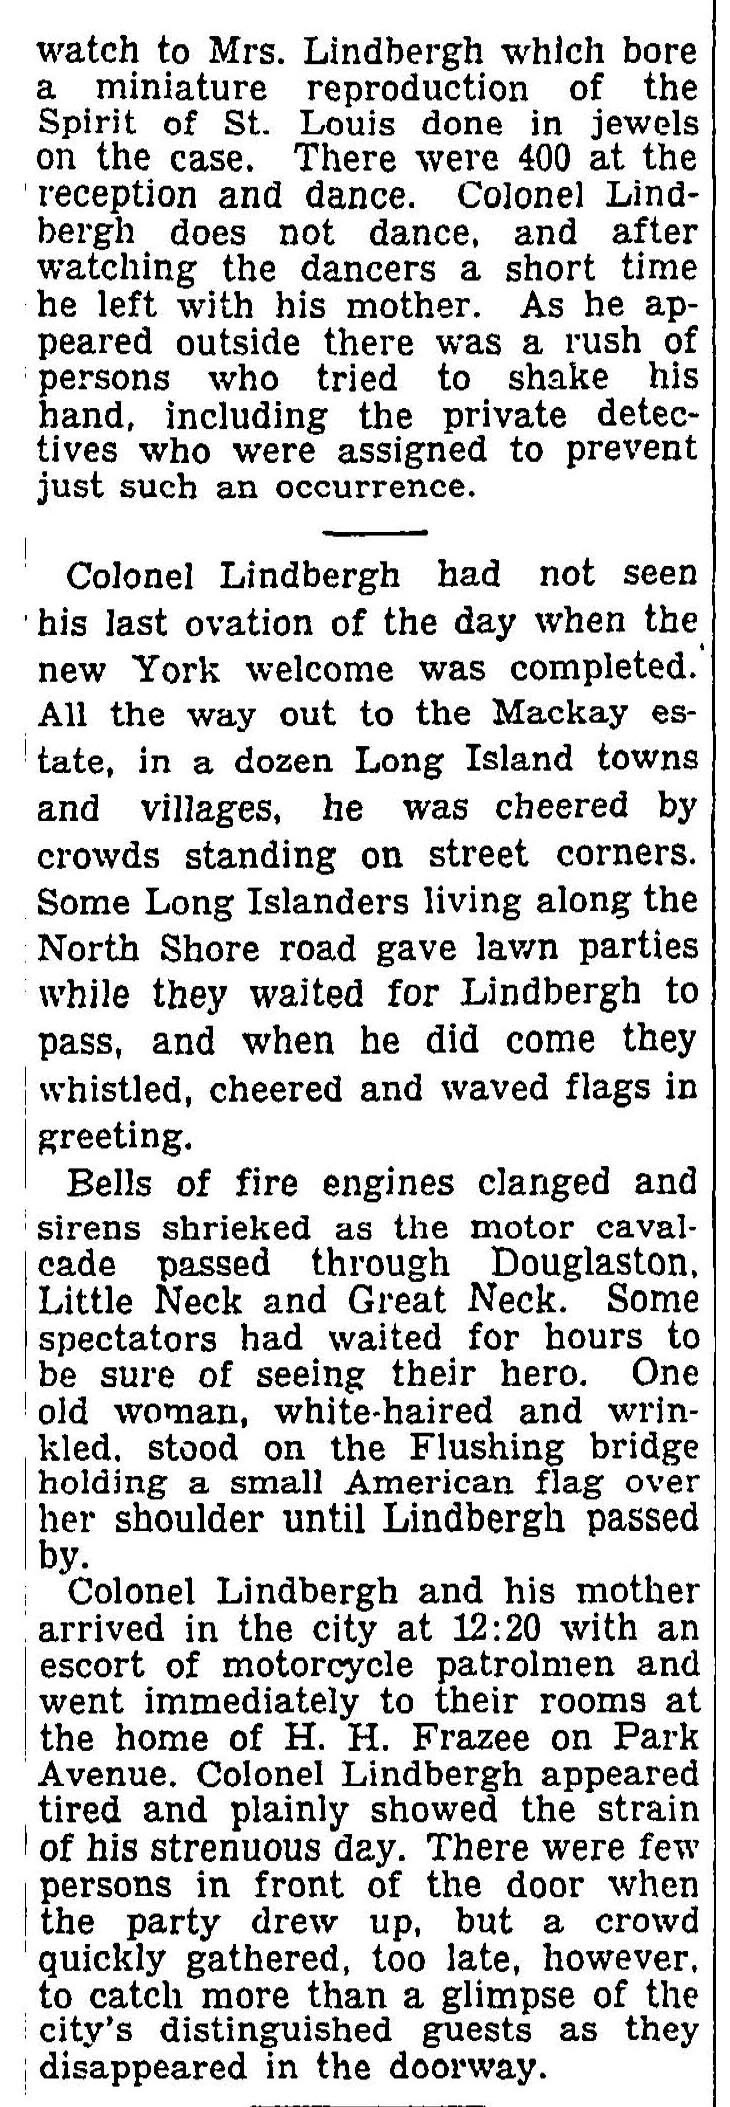 Air Hero Lionied at Social Function New York Times June 14 1927 Page 2 copy 4